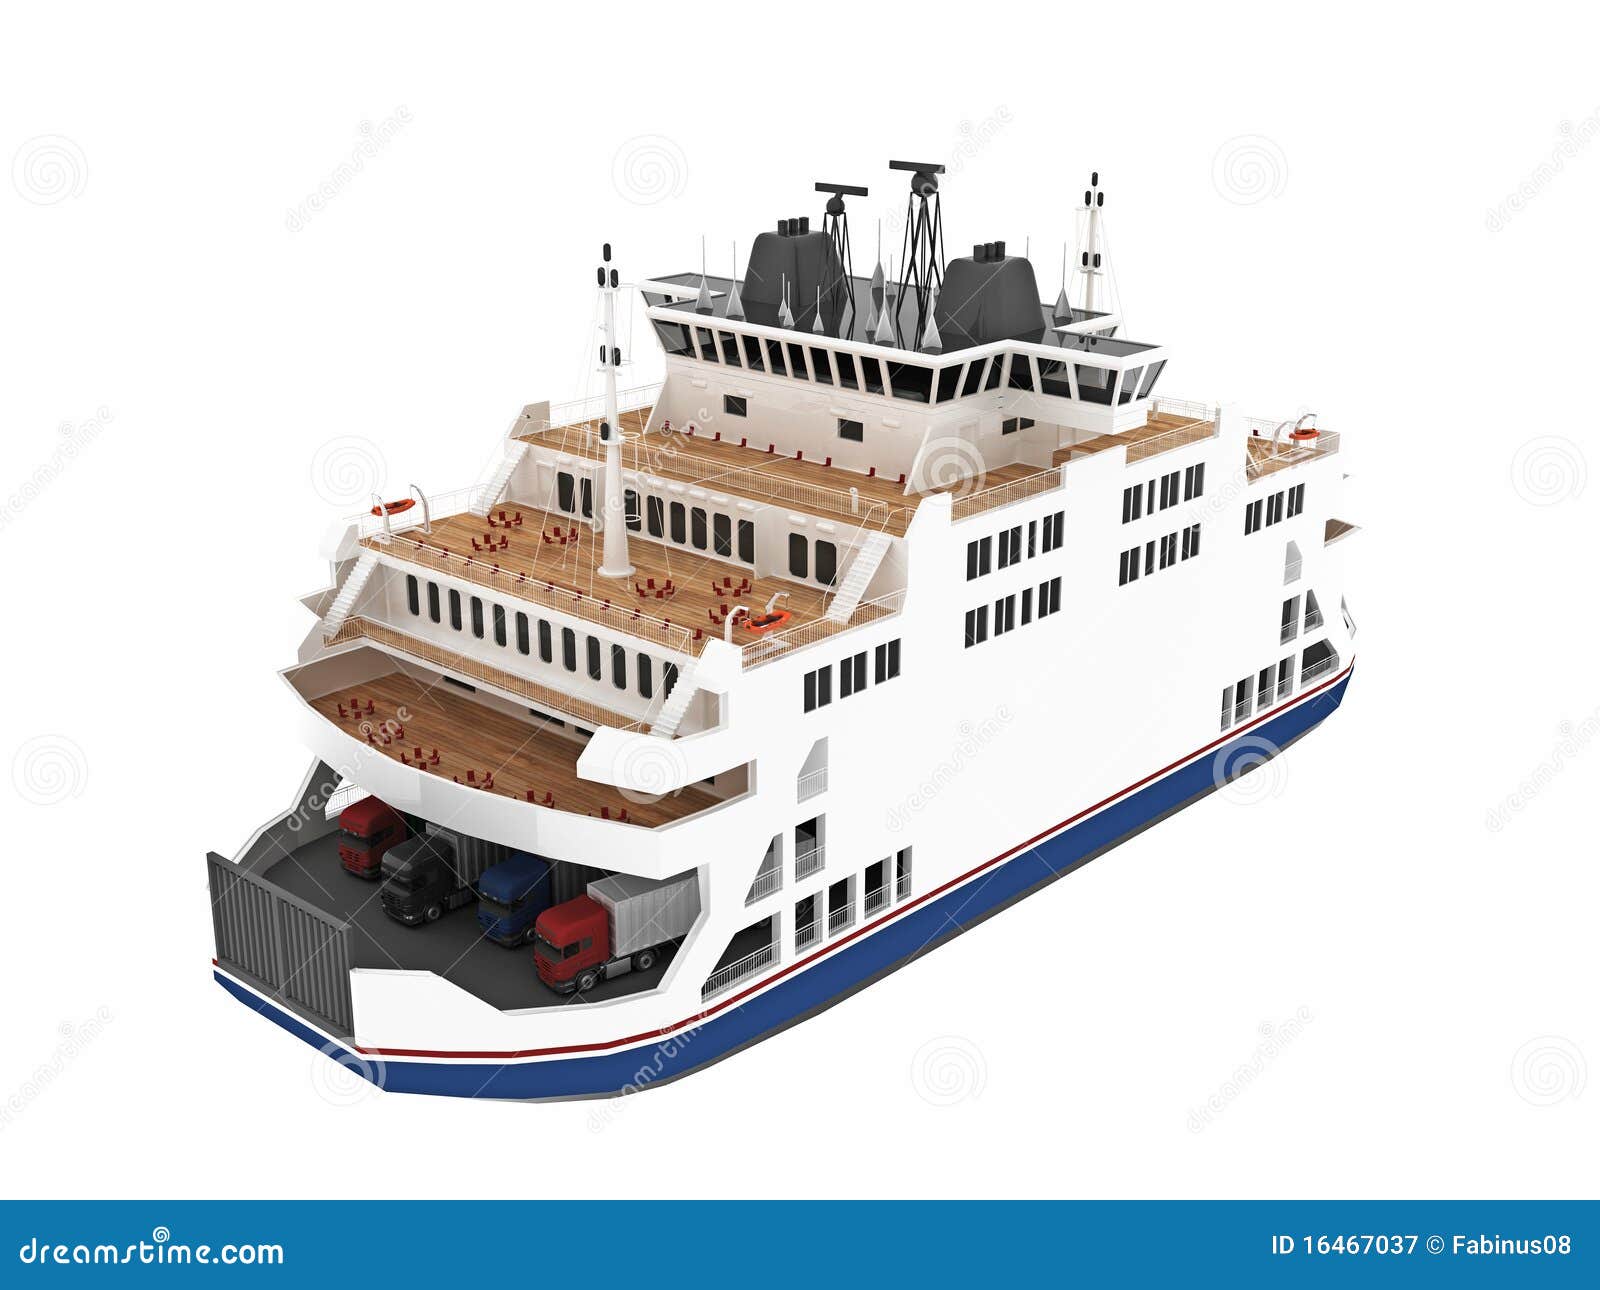 Royalty Free Stock Photography: Toy ferry boat. Image: 16467037